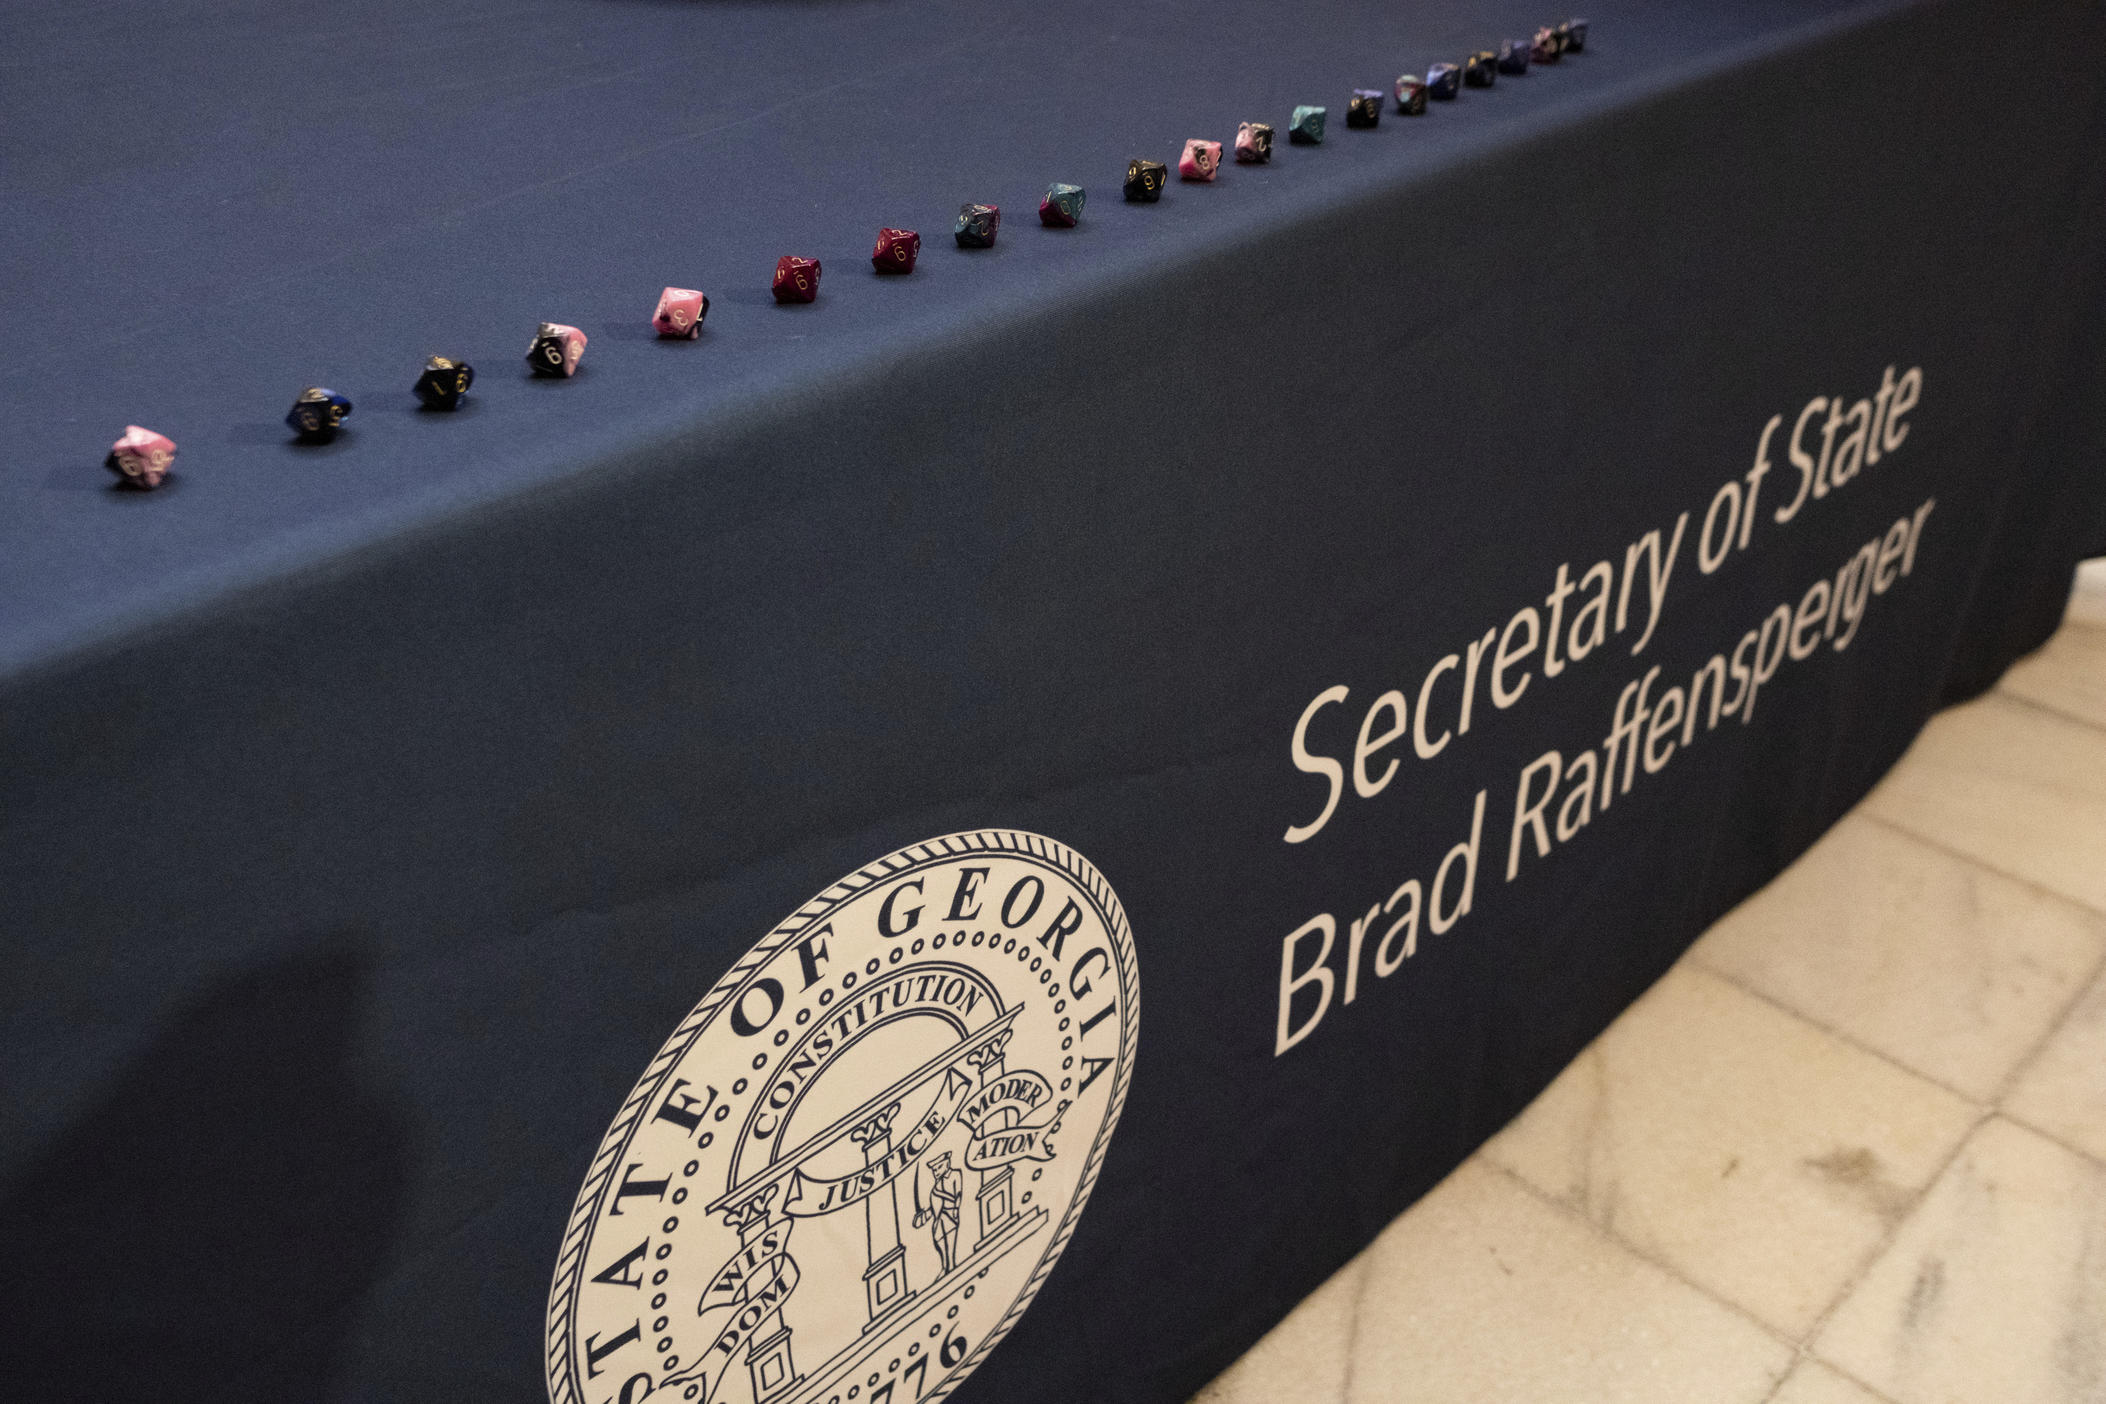 A row of 10-sided dice sit on the table after being used as part of process to randomly determine which batches of ballots to audit for a state-wide risk limiting audit of the 2022 general election during a press conference Wednesday, Nov. 16, 2022, at the Georgia Capitol in Atlanta.